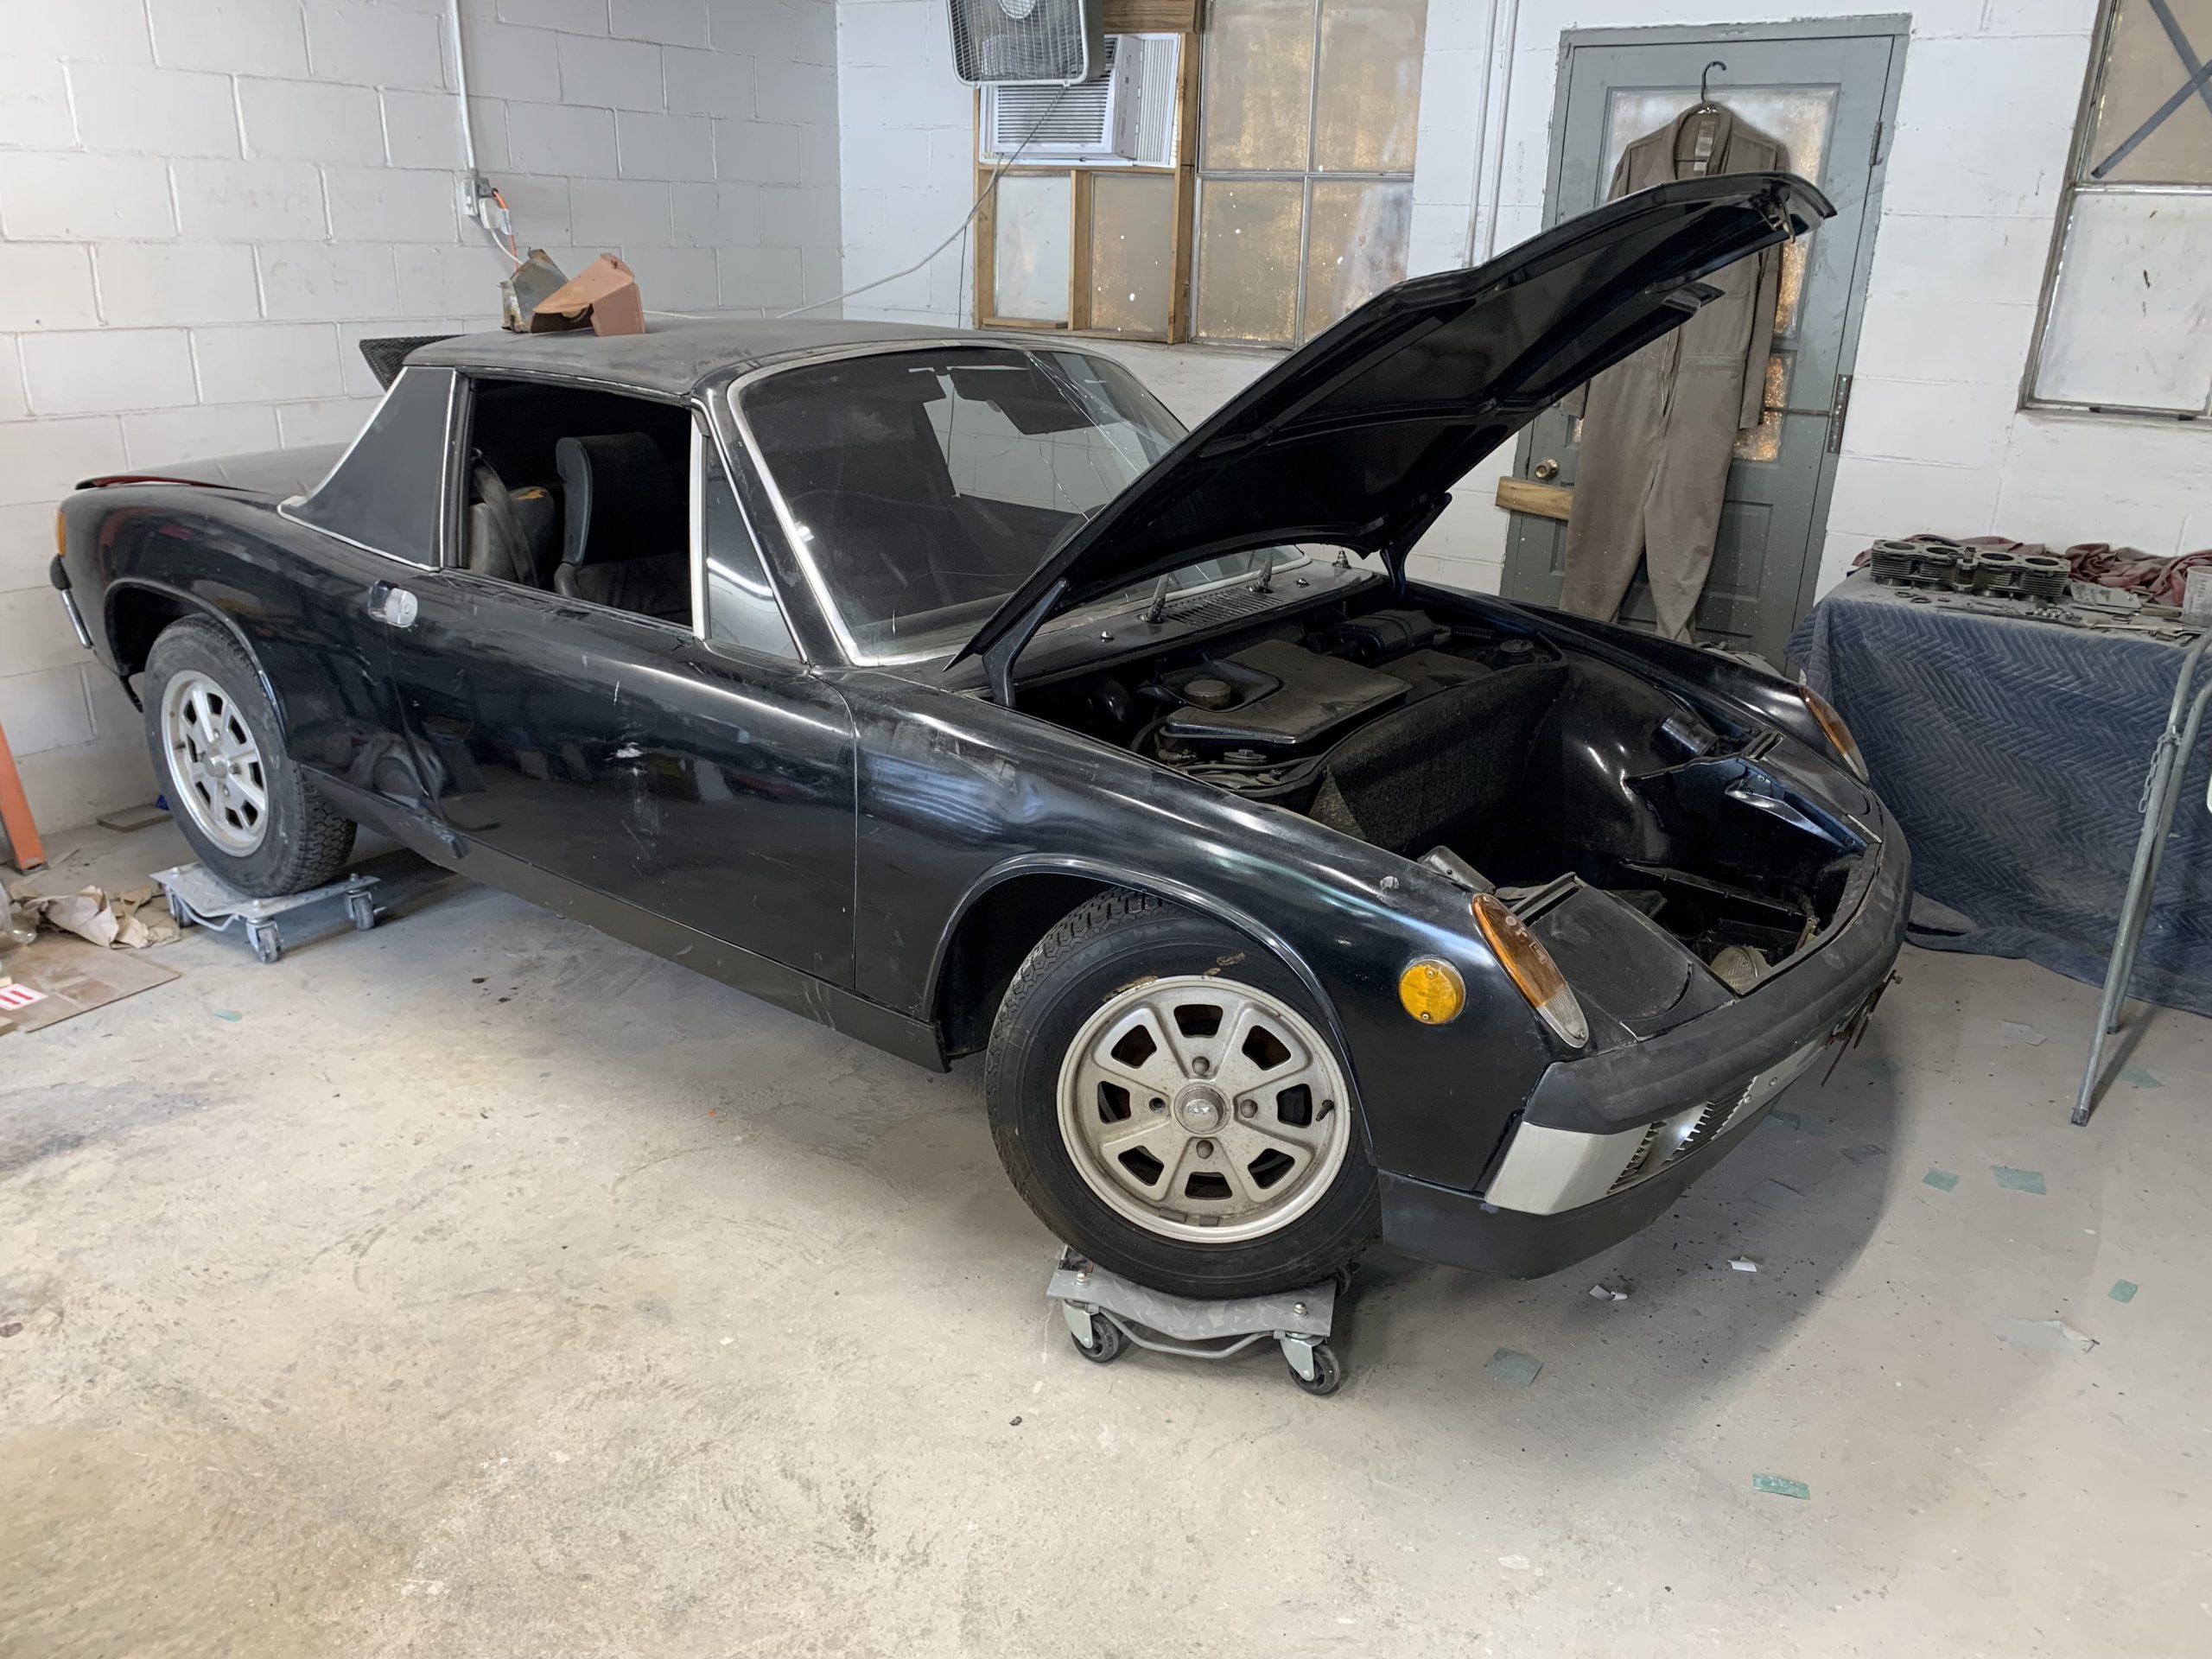 1972 Porsche 914 2.0 side view as purchased, black side view at body shop